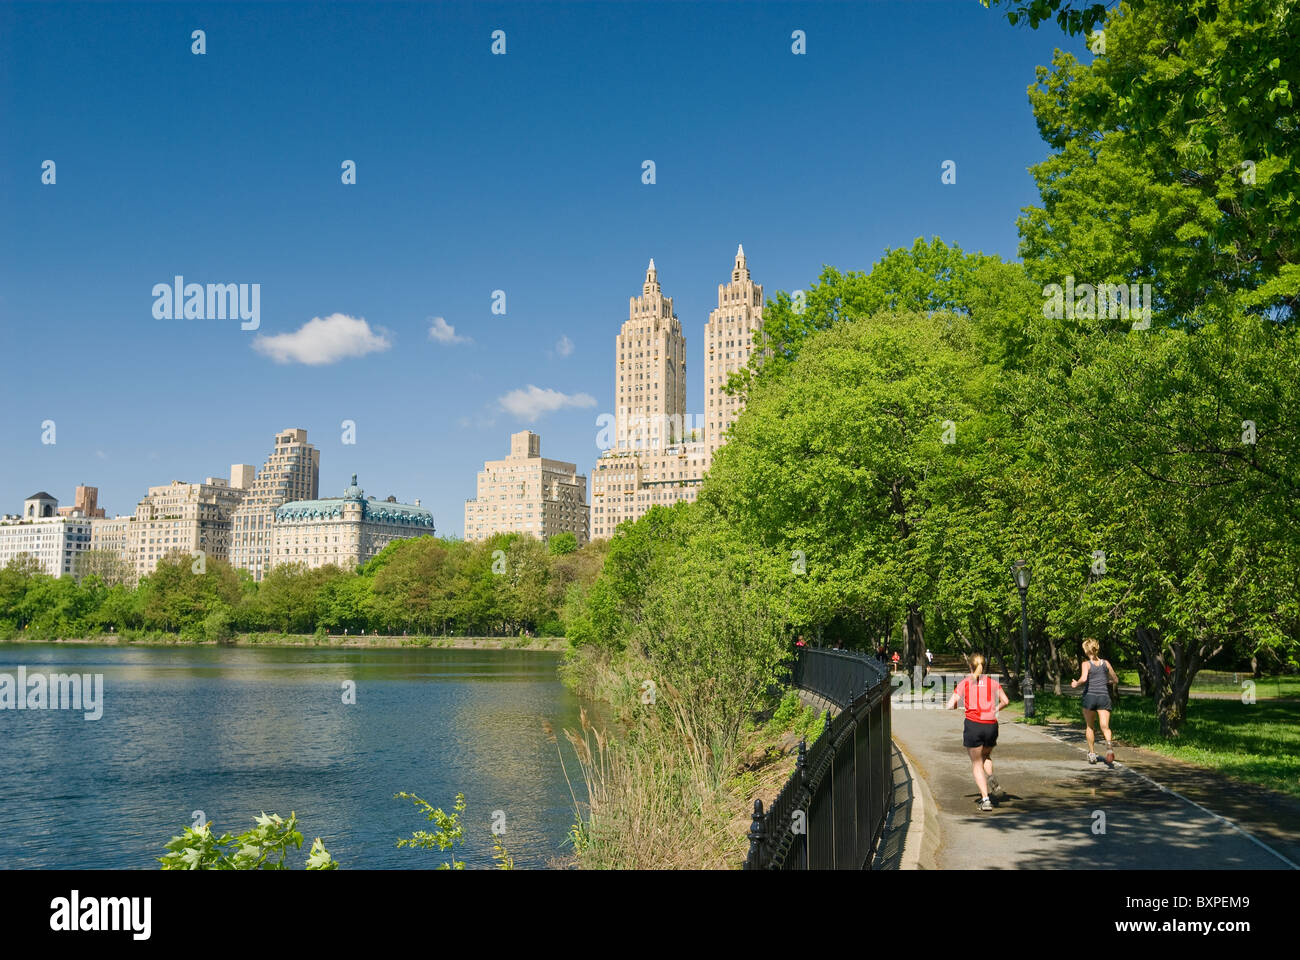 The Reservoir jogging track, with a view of the Central Park West skyline, Central Park, New York City. Stock Photo